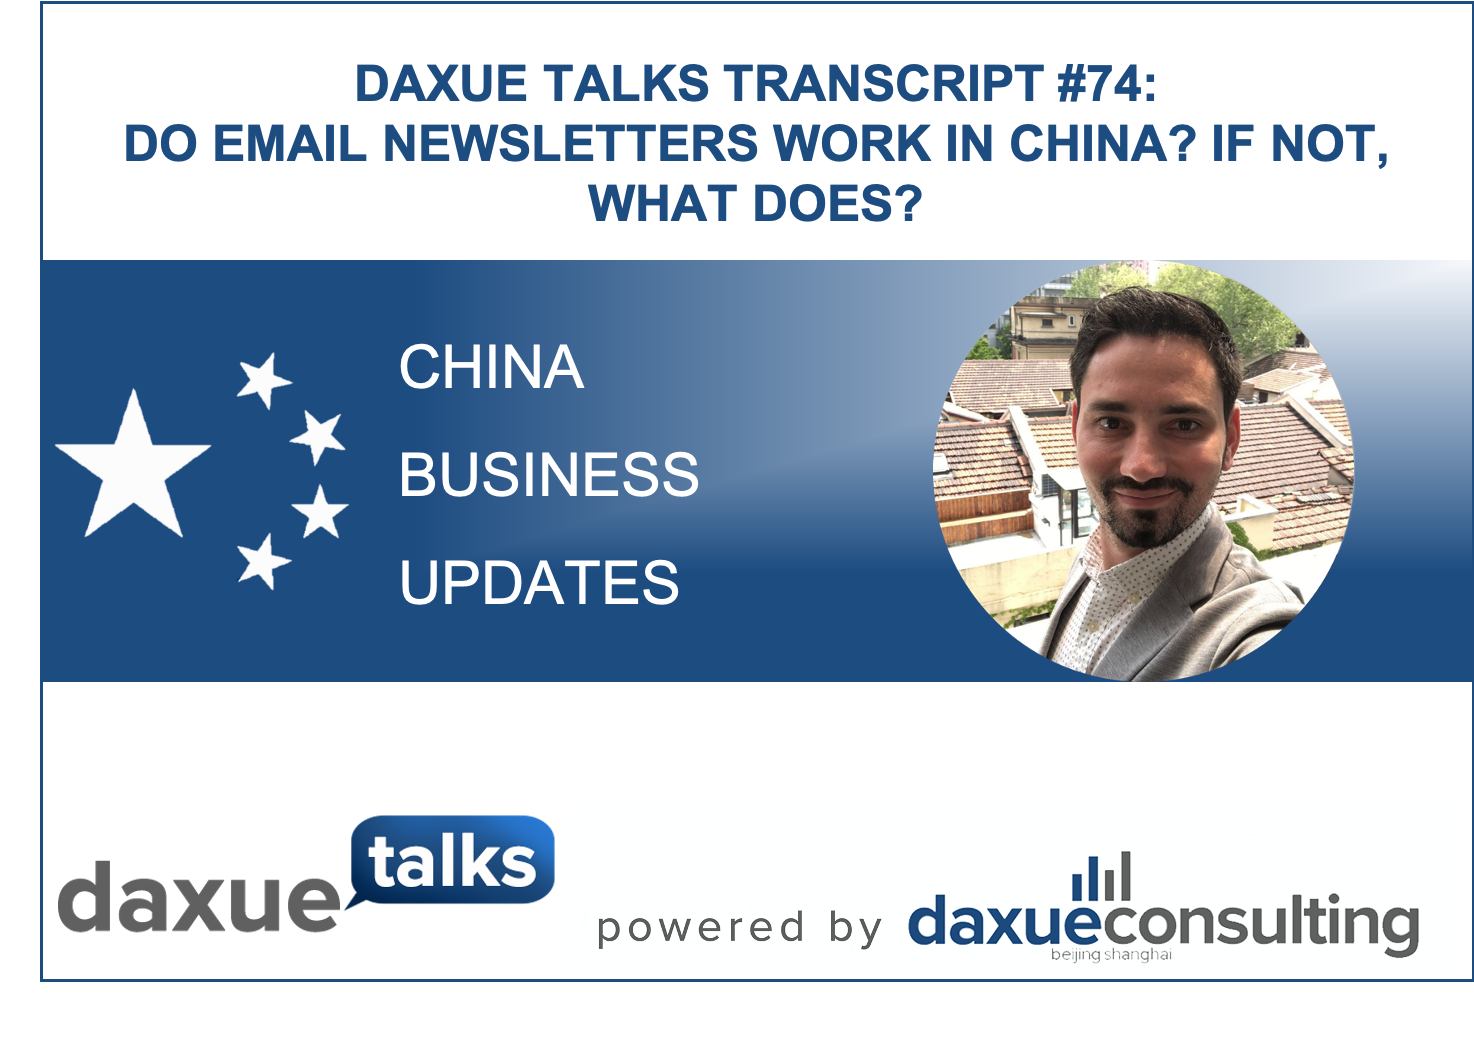 Daxue Talks transcript #74: Do email newsletters work in China? If not, what does?